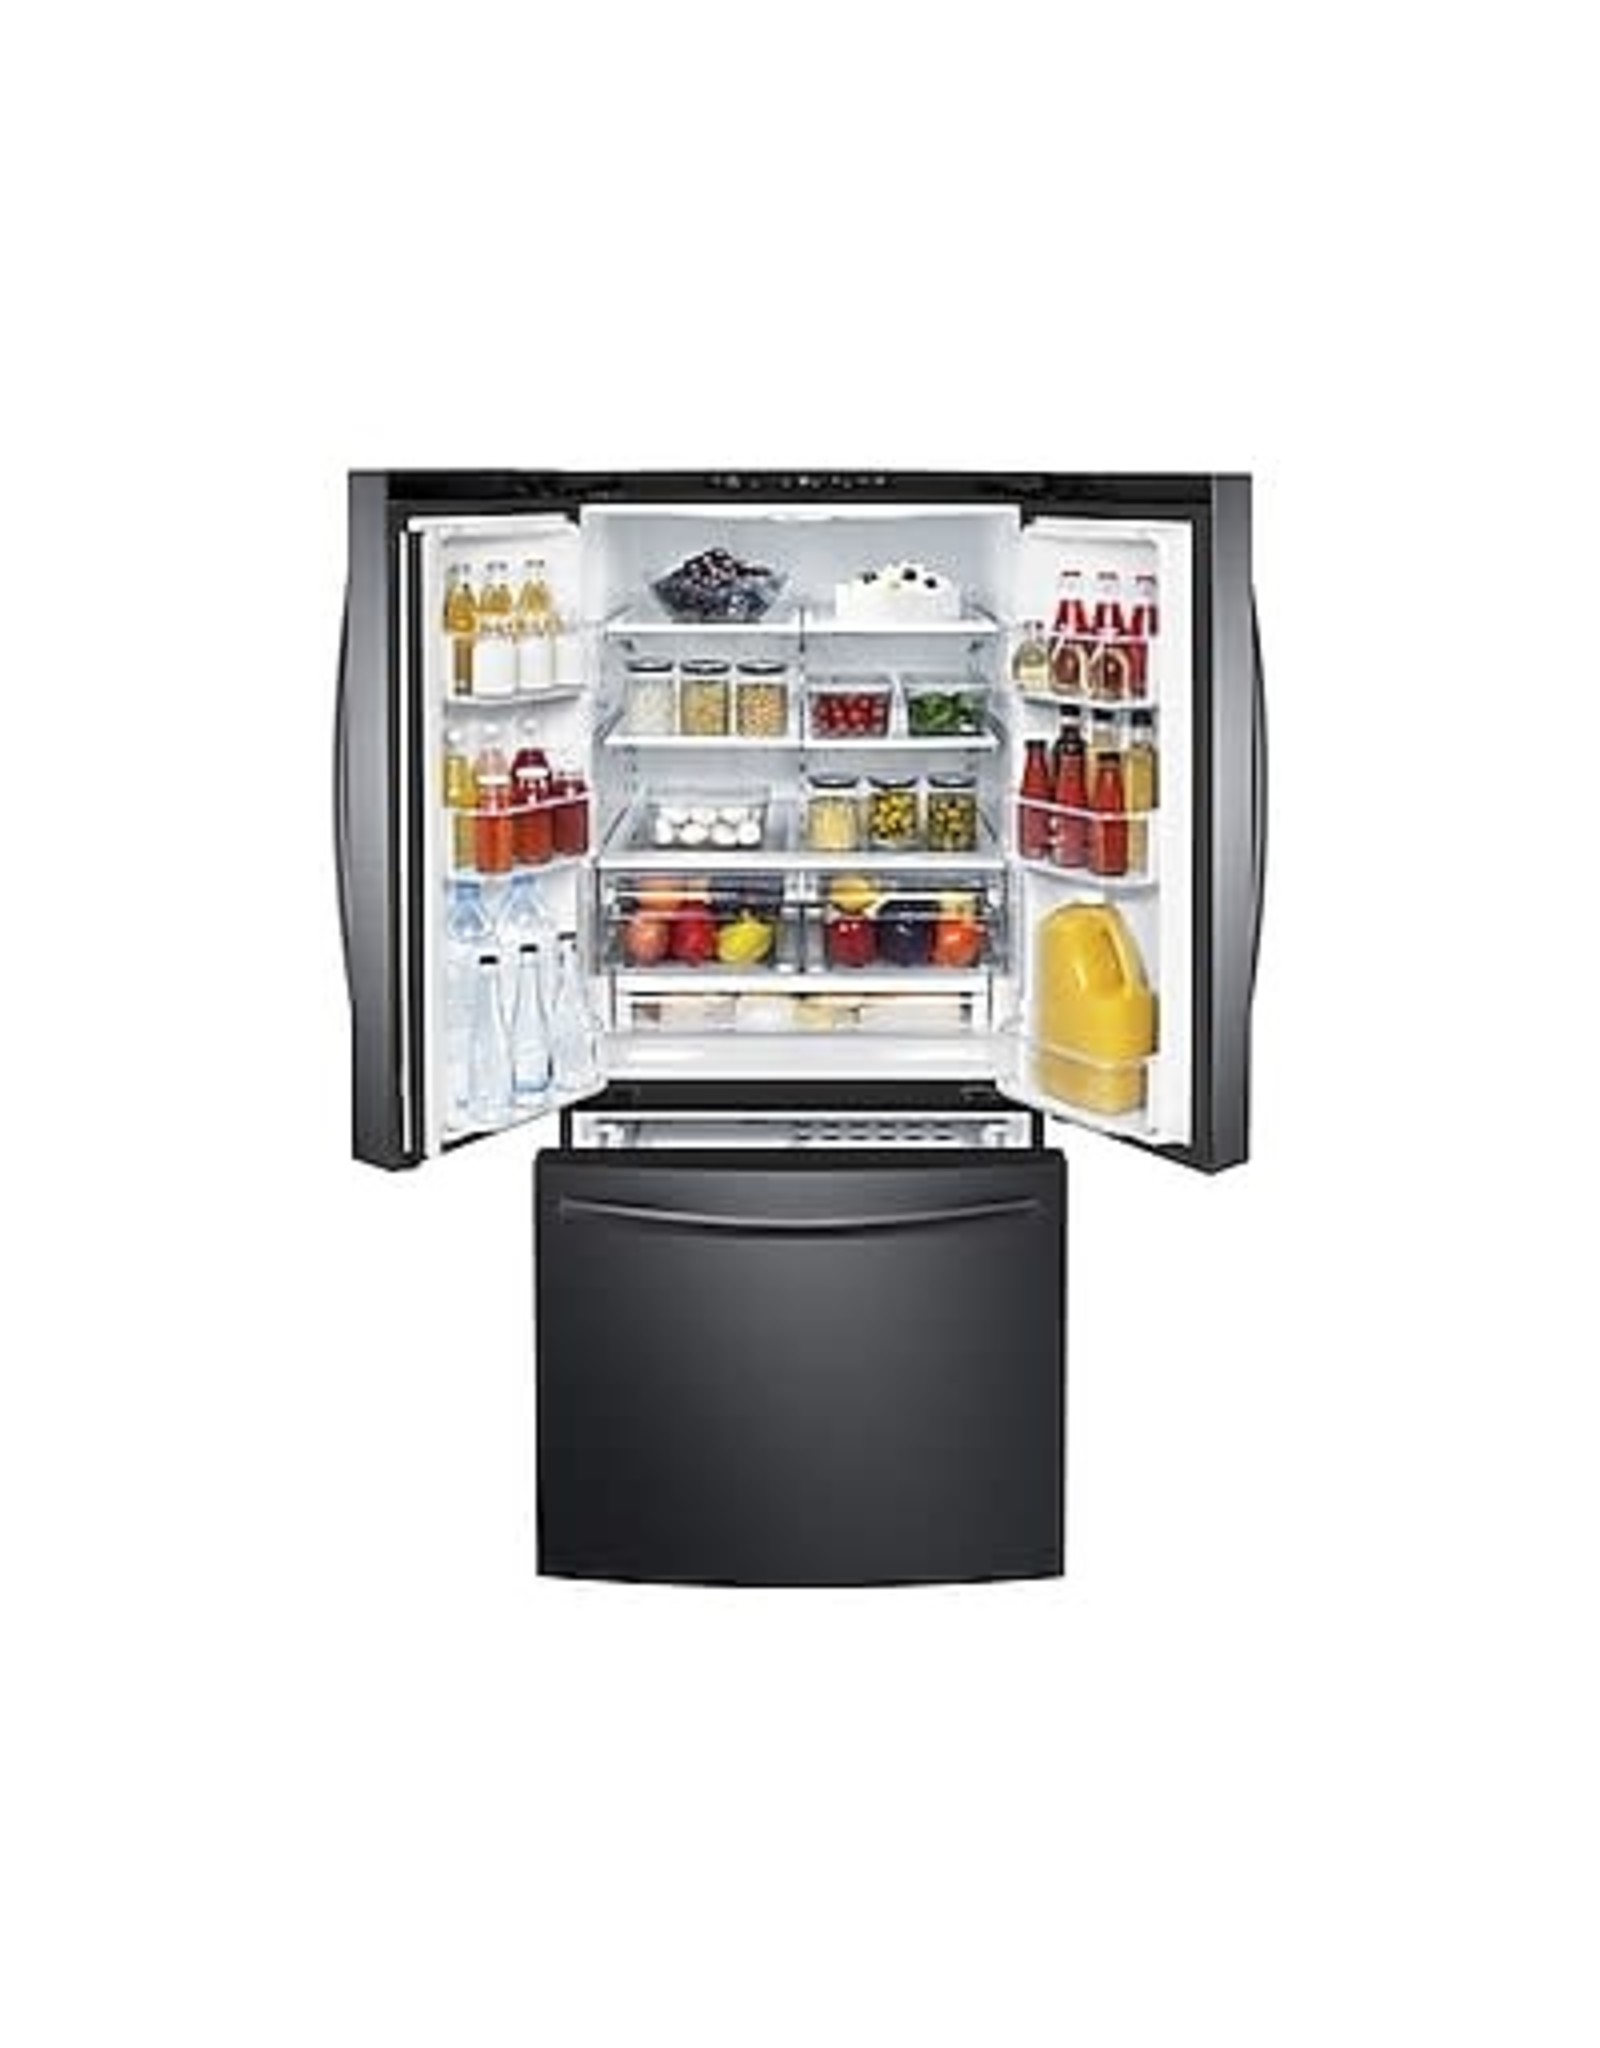 SAMSUNG RF220NCTASG 22 cu. ft. French Door Refrigerator in Black Stainless Steel